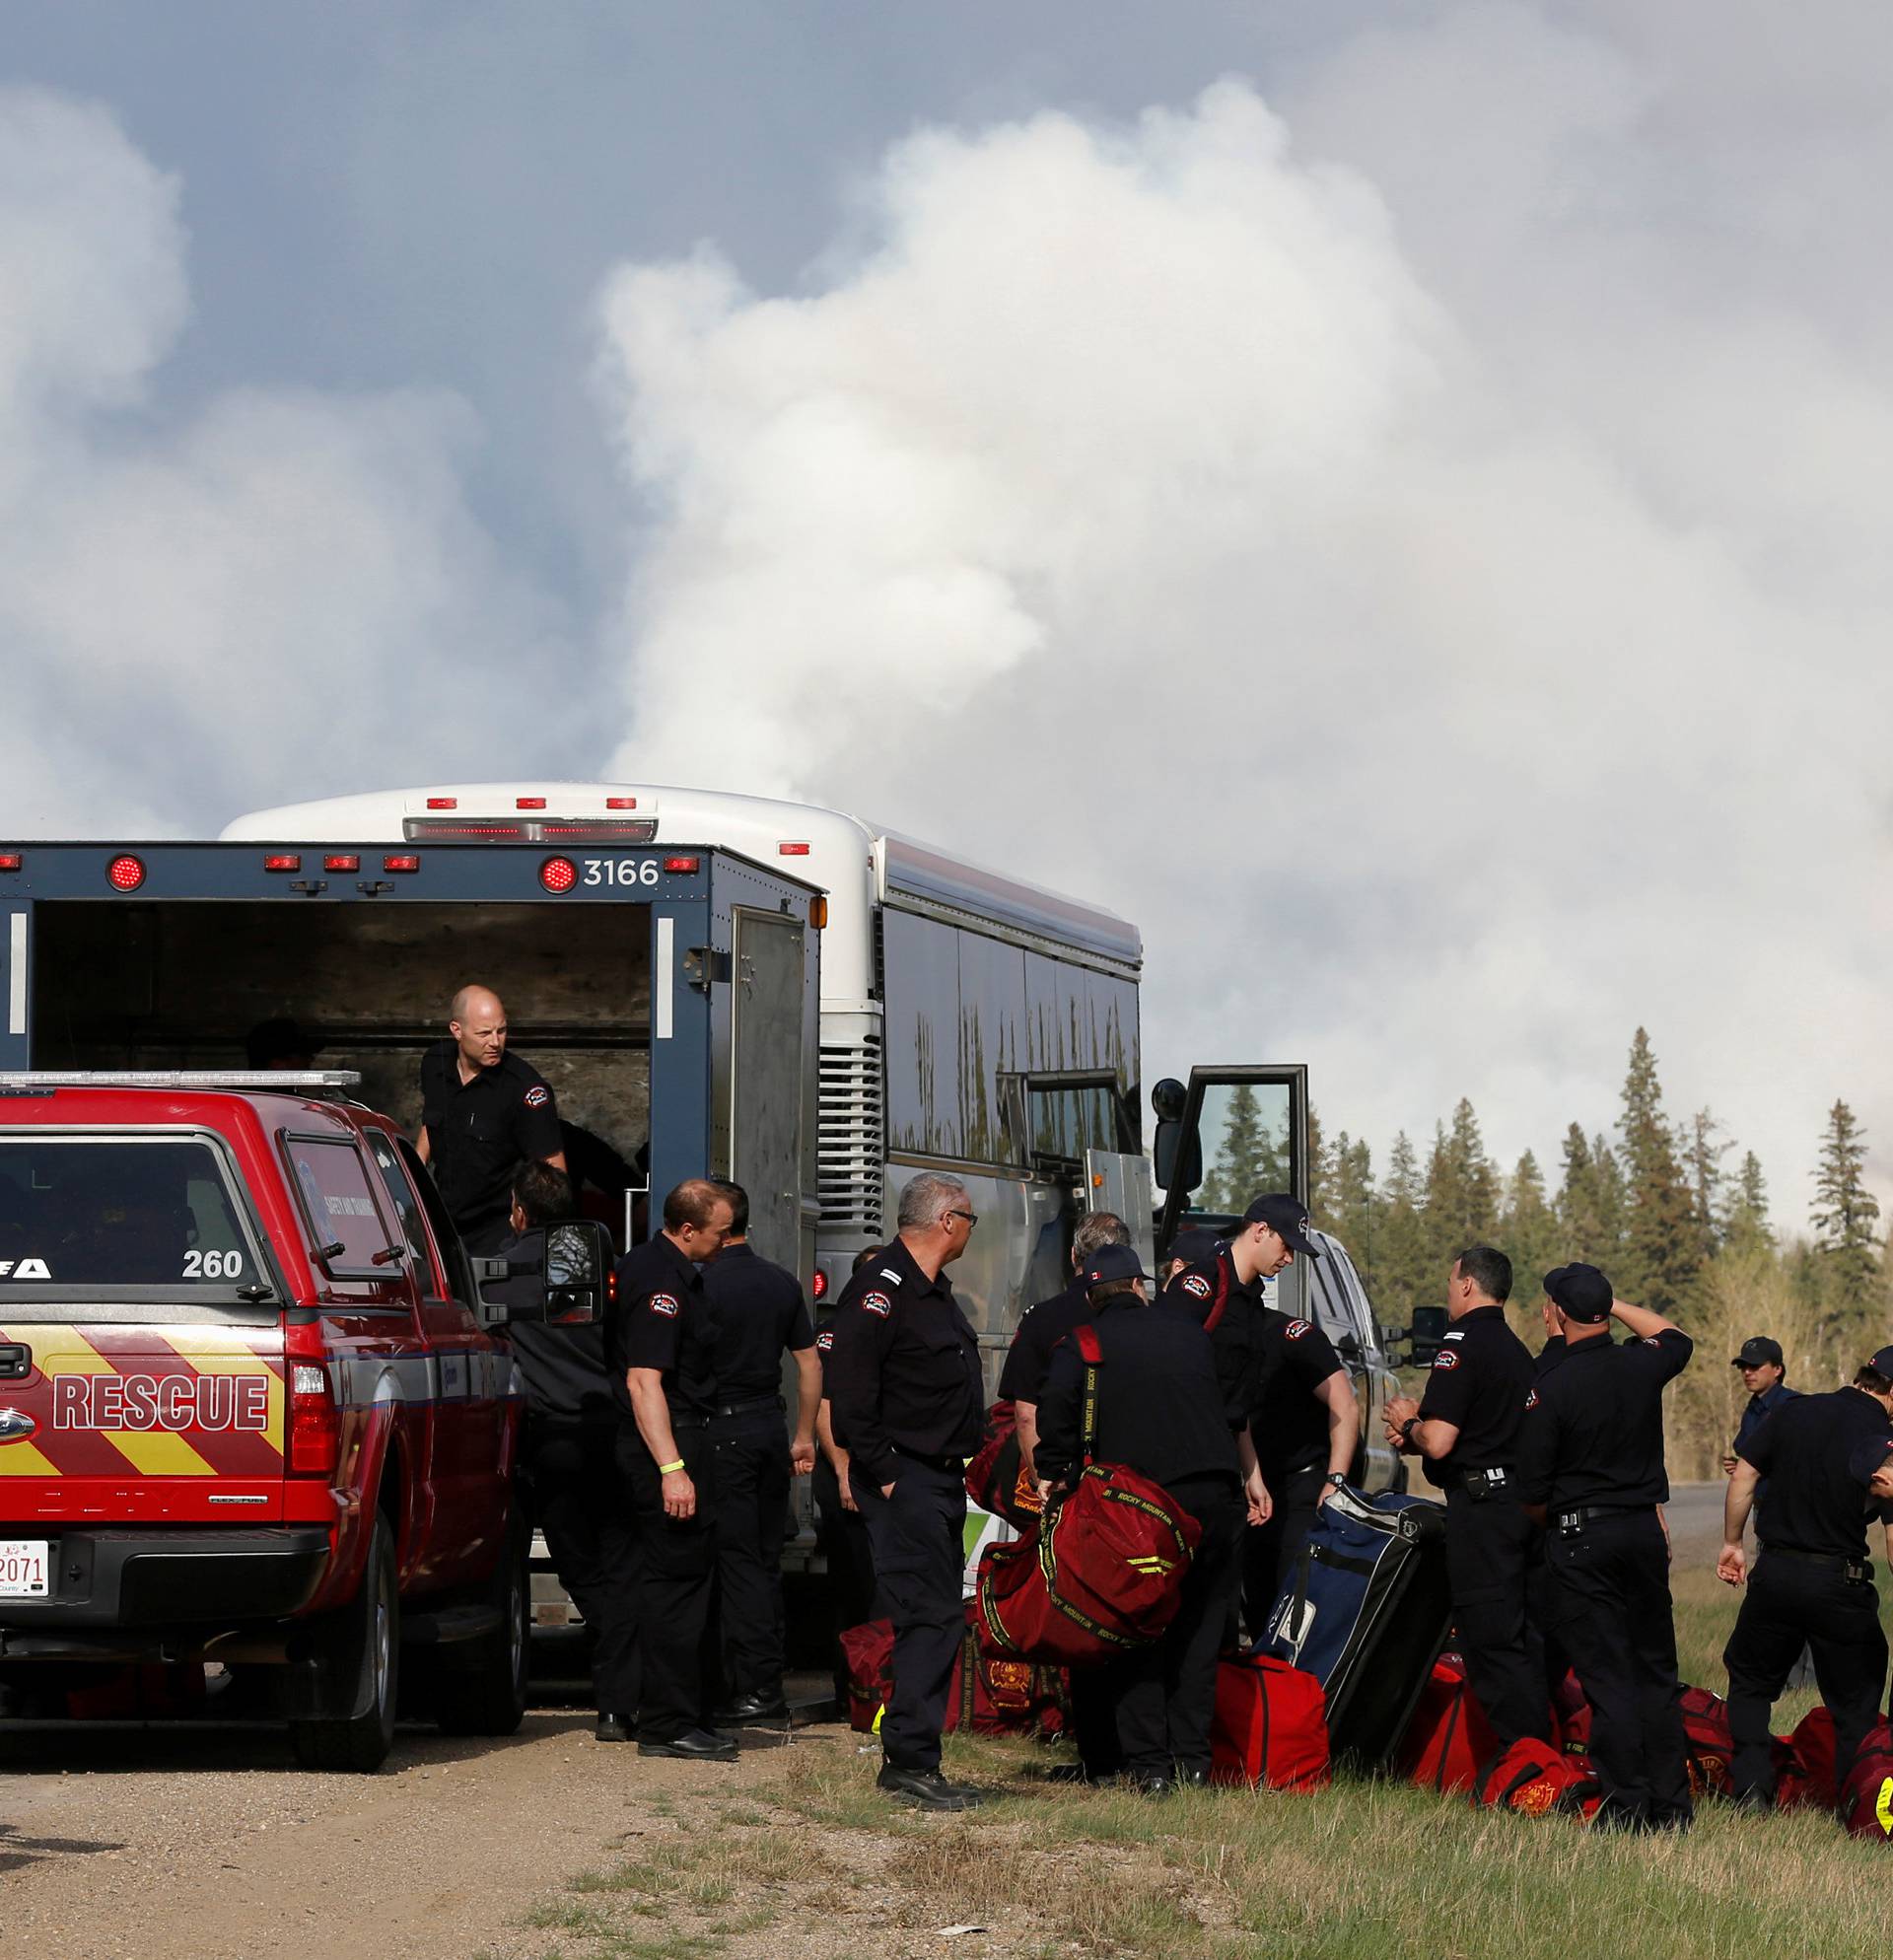 Firefighters unload equipment as smoke rises from nearby wildfires near Fort McMurray